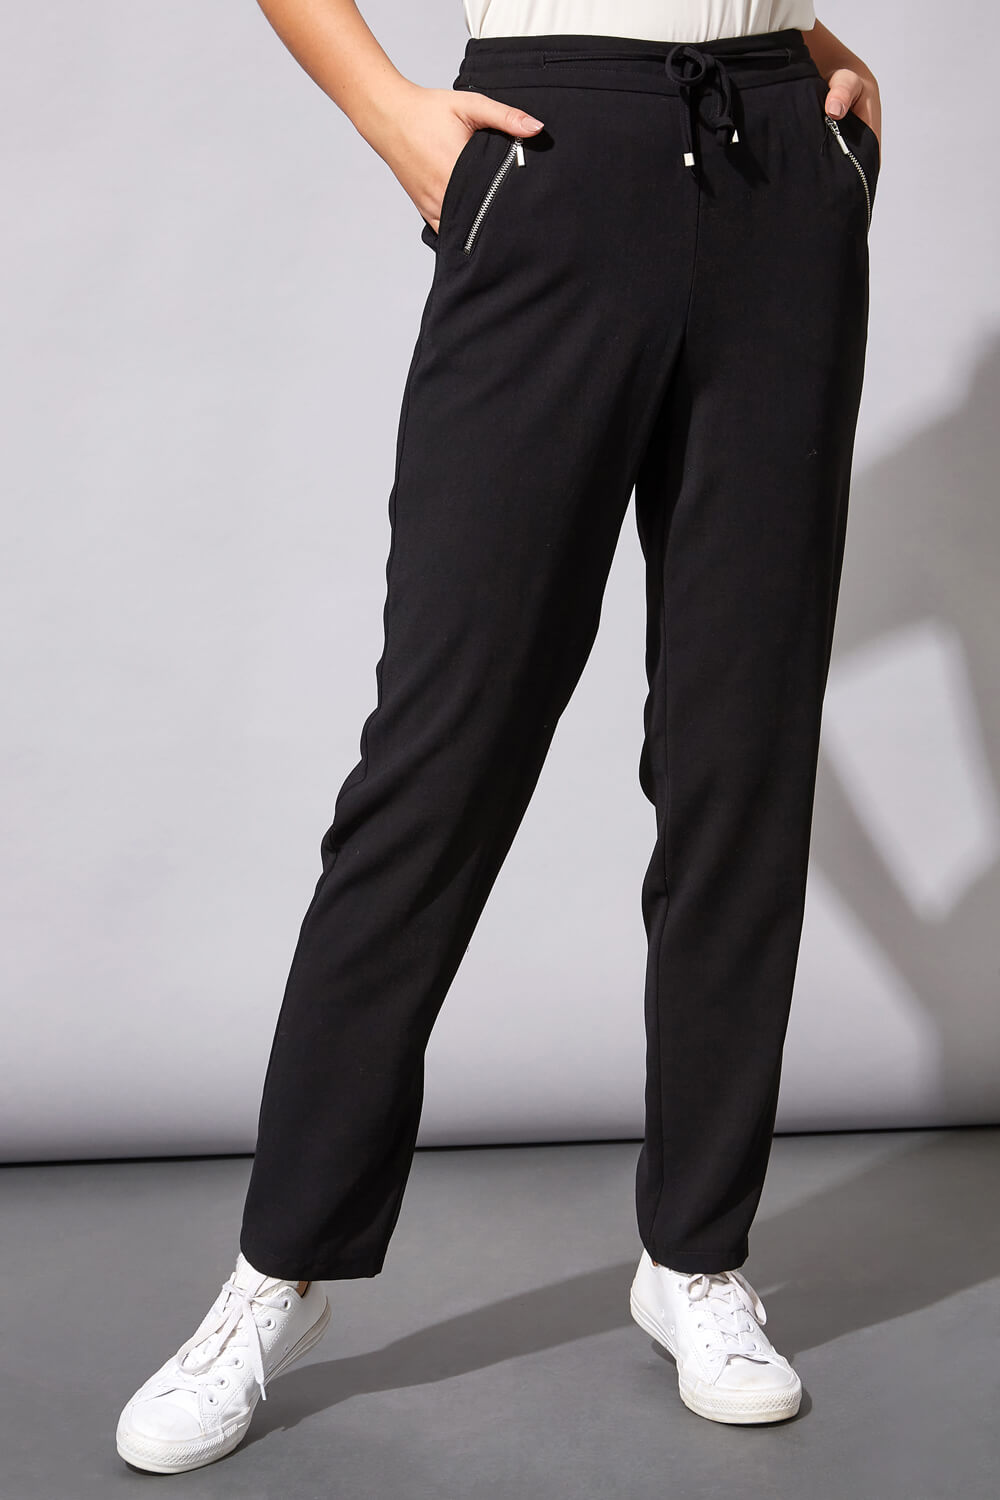 31 Inch Tie Front Jogger